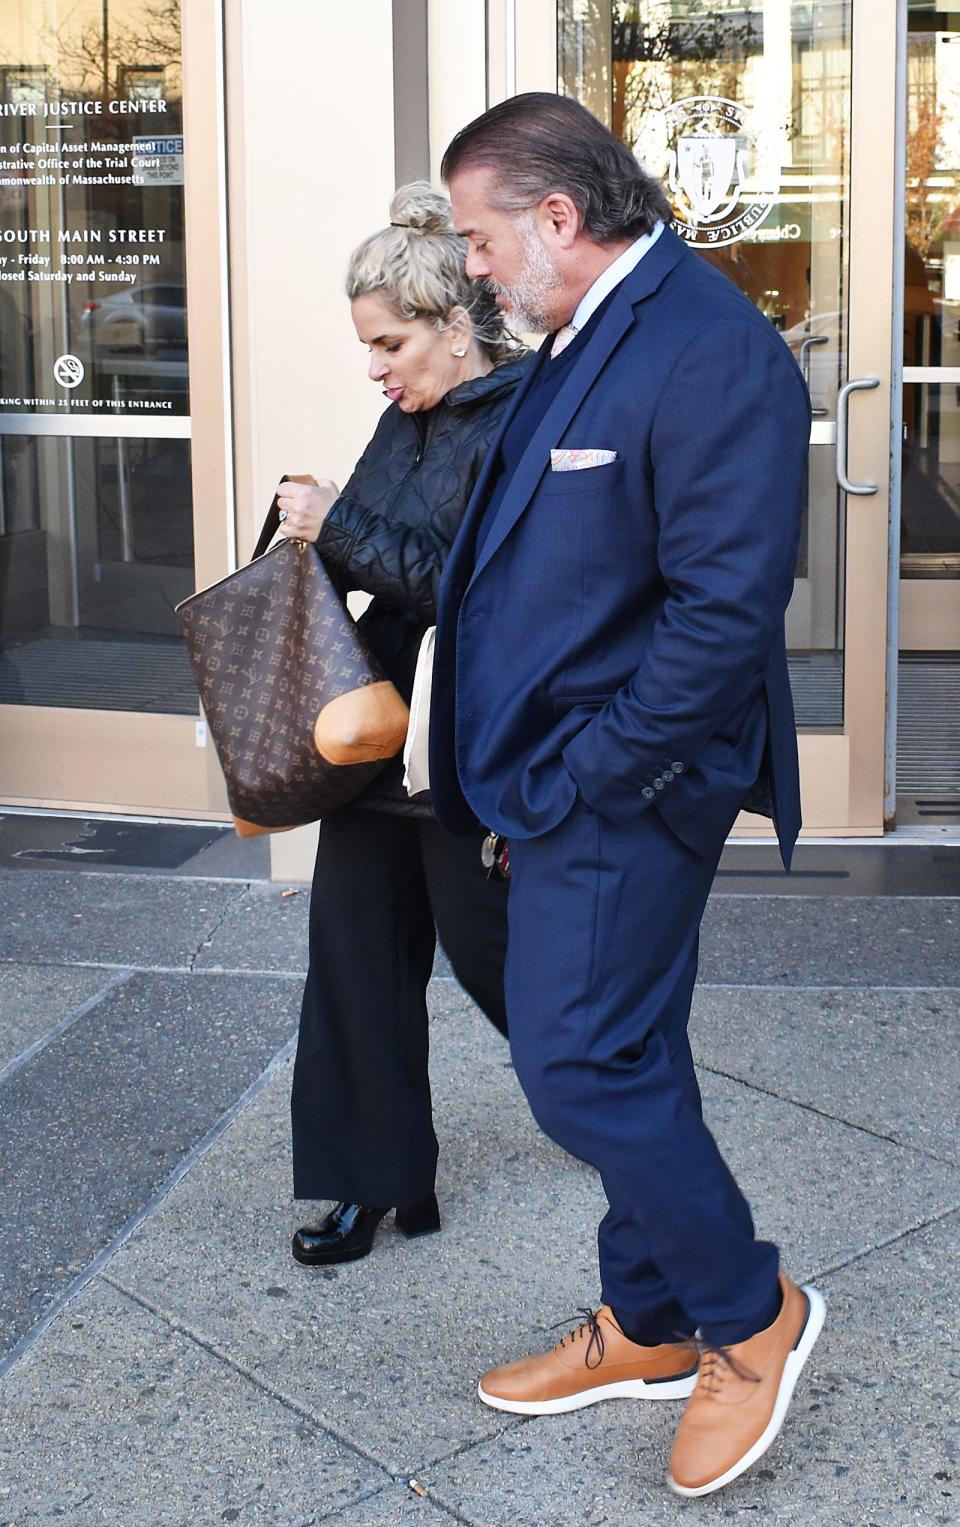 Pam Laliberte-Lebeau leaves the Justice Center with her attorney Frank Camera Friday.